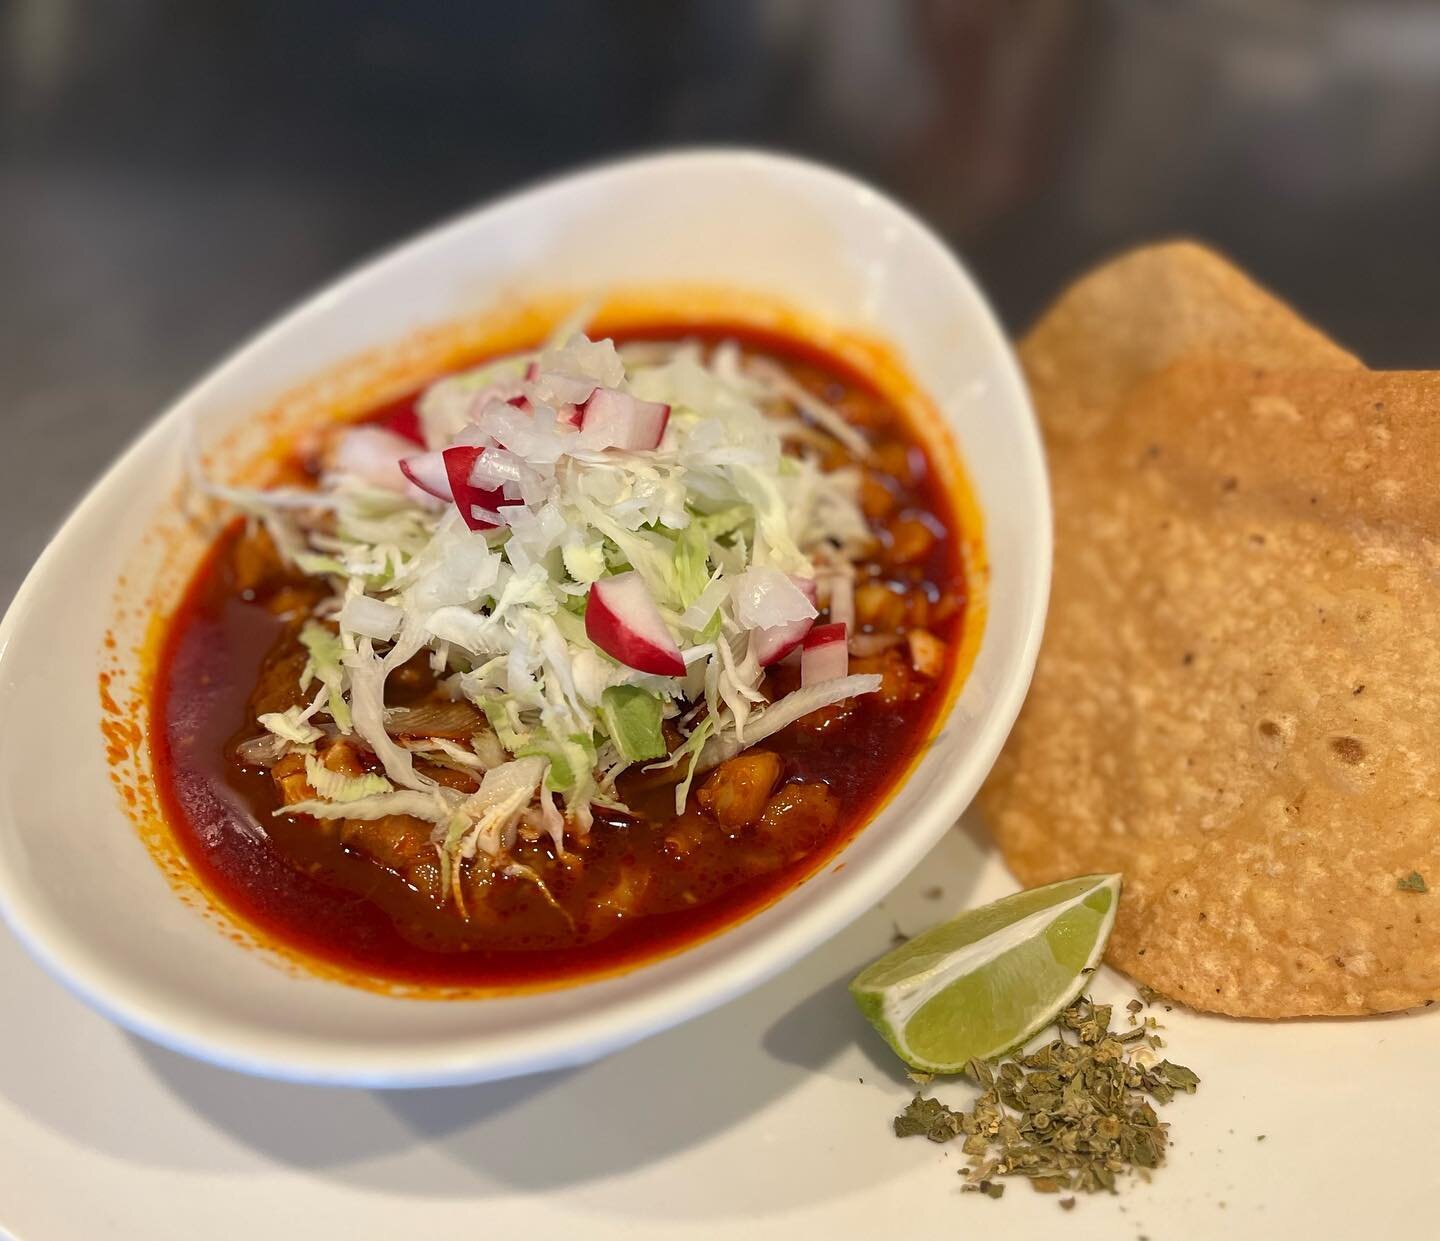 Come by this weekend for our delicious 
Pozole Rojo! 🔥
&bull;Pork and Hominy in a Red Chile Broth topped with Shredded Cabbage, Onions, Radish and Oregano. Served with Tostadas&bull;

#breakfast #catrinacafe #brunch #ocfoodie #pozolerojo #pozole #yu